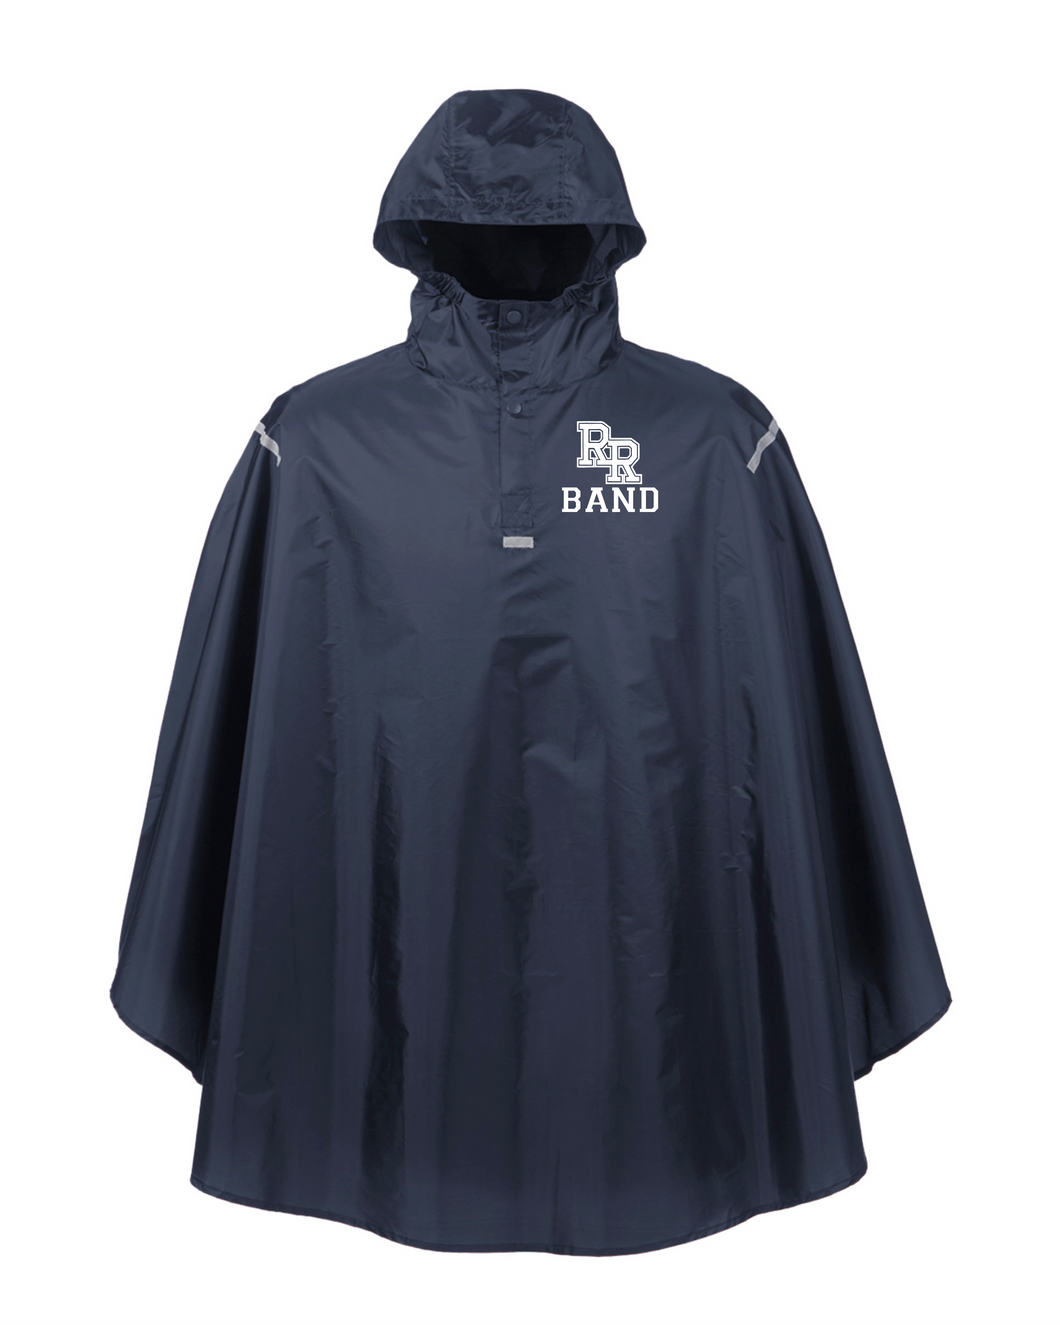 RR-BND-460-3 - Team 365 Adult Zone Protect Packable Poncho - RR Band Logo